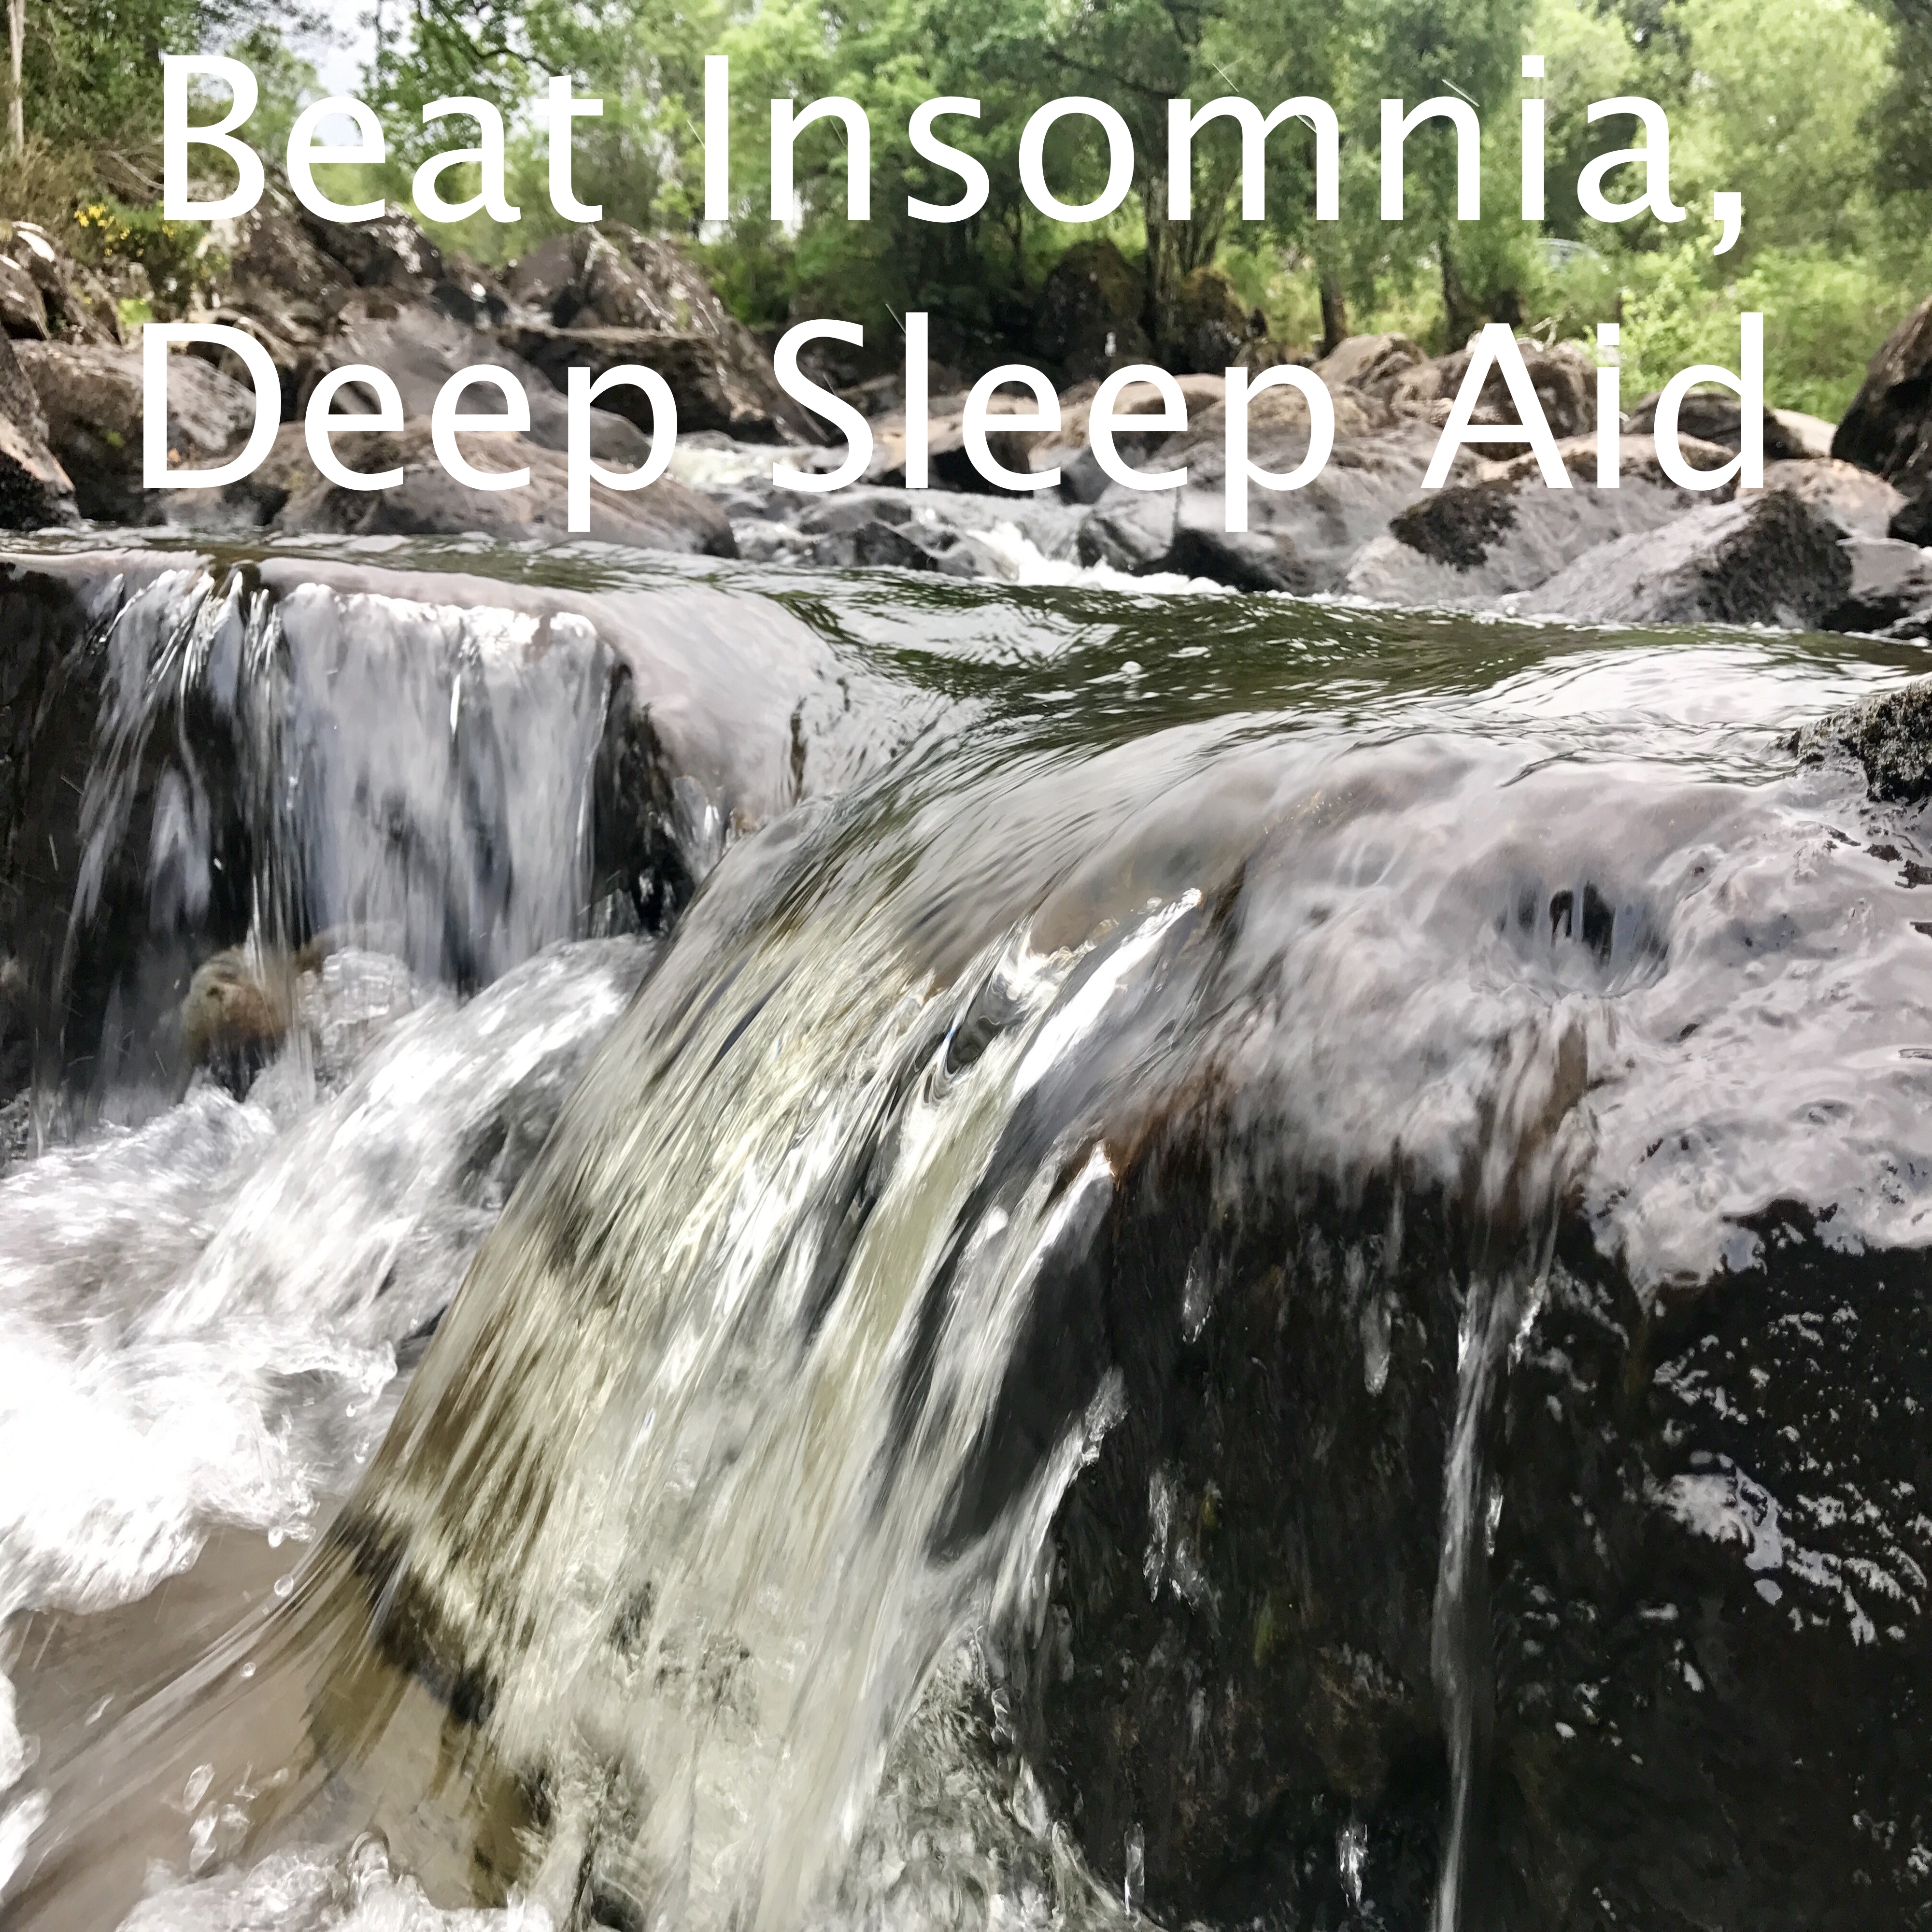 17 Insomnia Curing Sounds, Nature Sounds, Rain and White Noise, Beat Insomnia and Deep Sleep